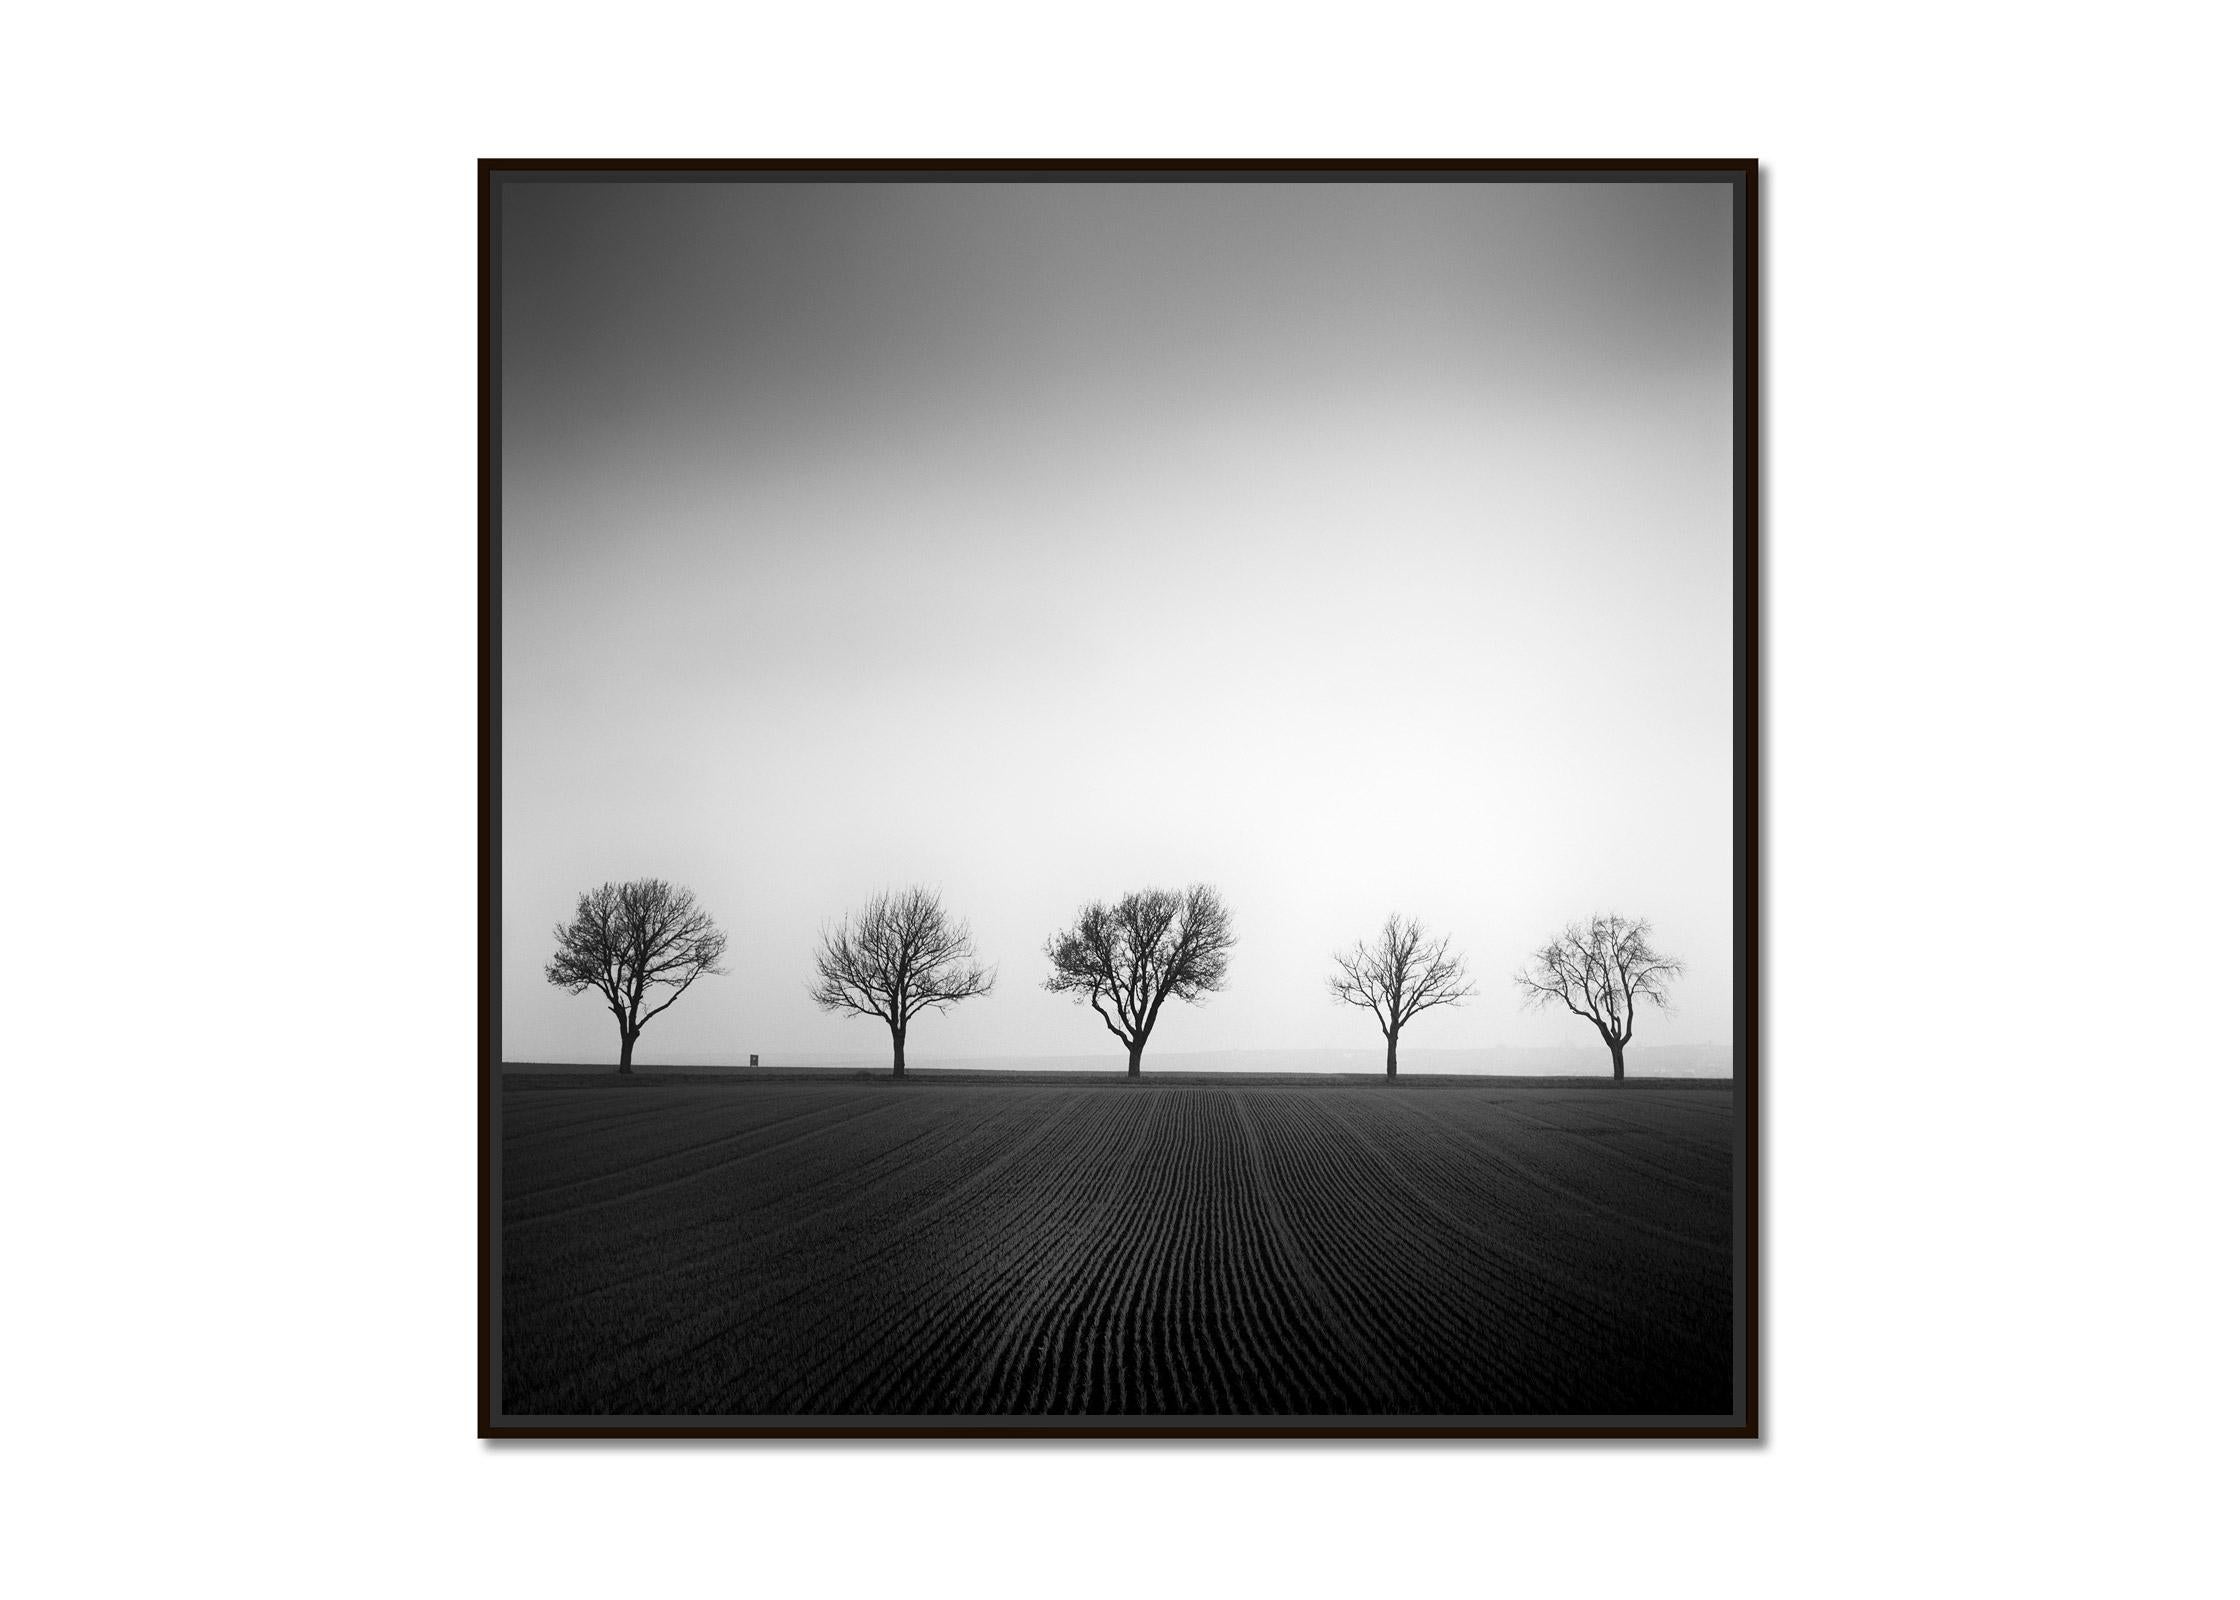 Cherry Tree Avenue, minimalist black and white photography, landscape, fine art - Photograph by Gerald Berghammer